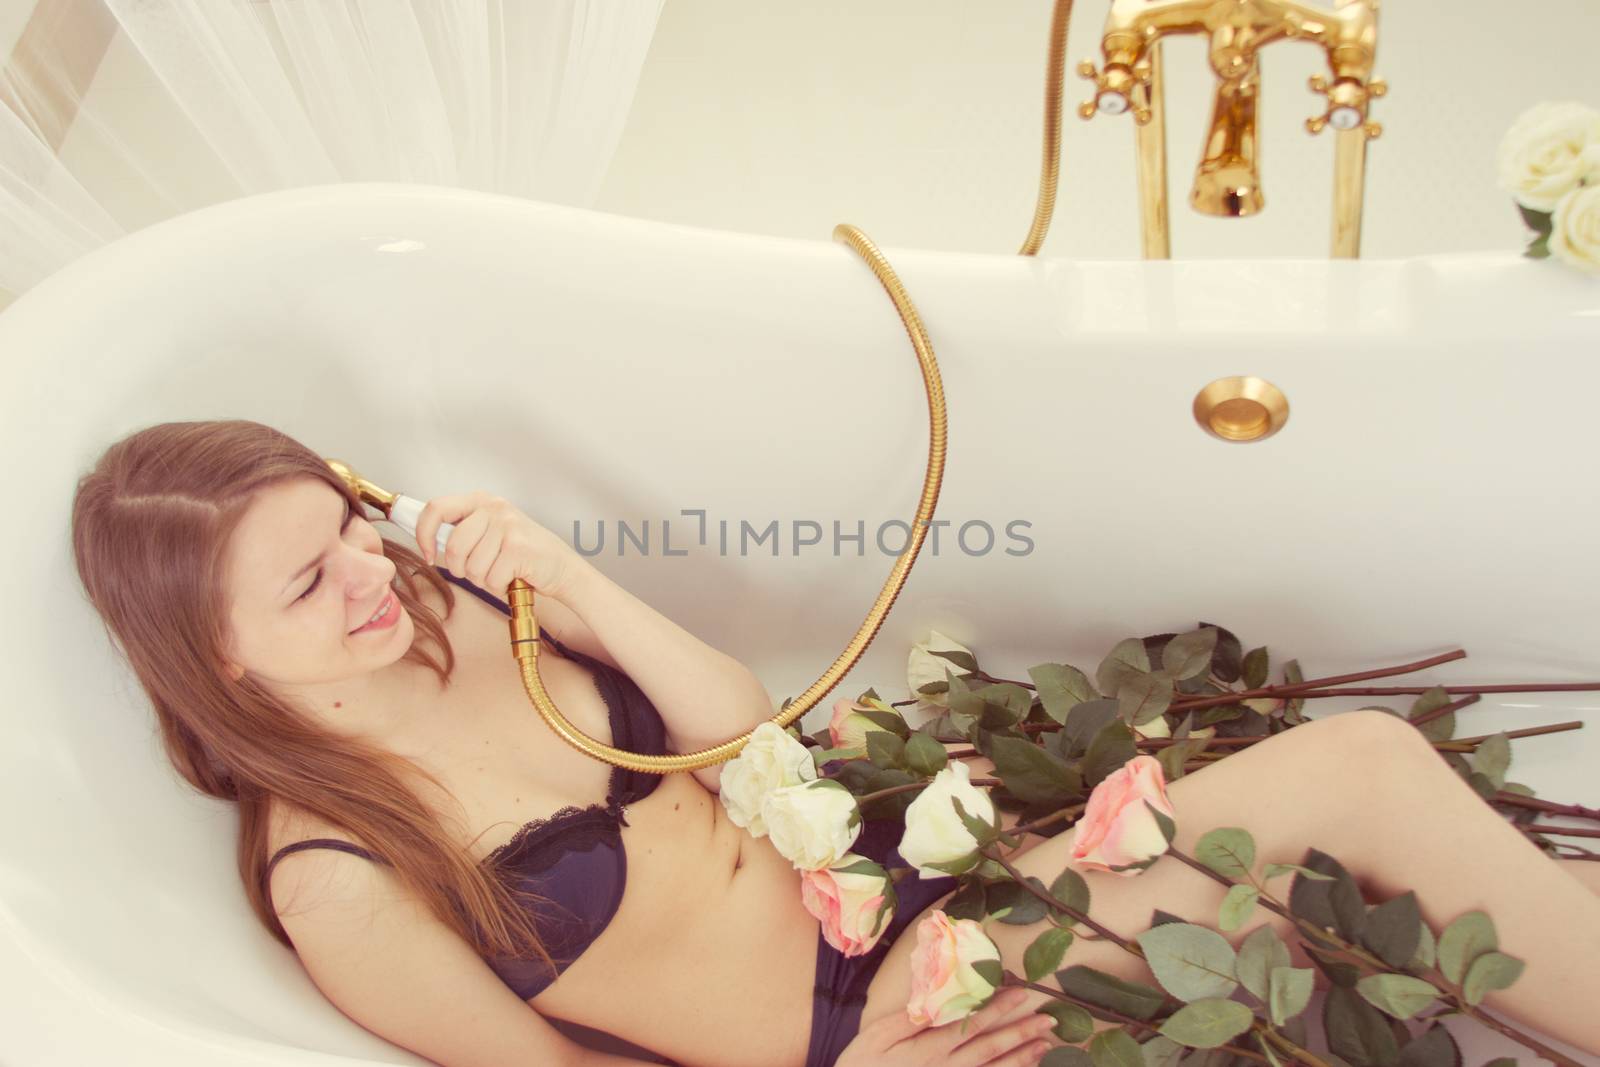 Girl in underwear lying in the bathroom with roses without water